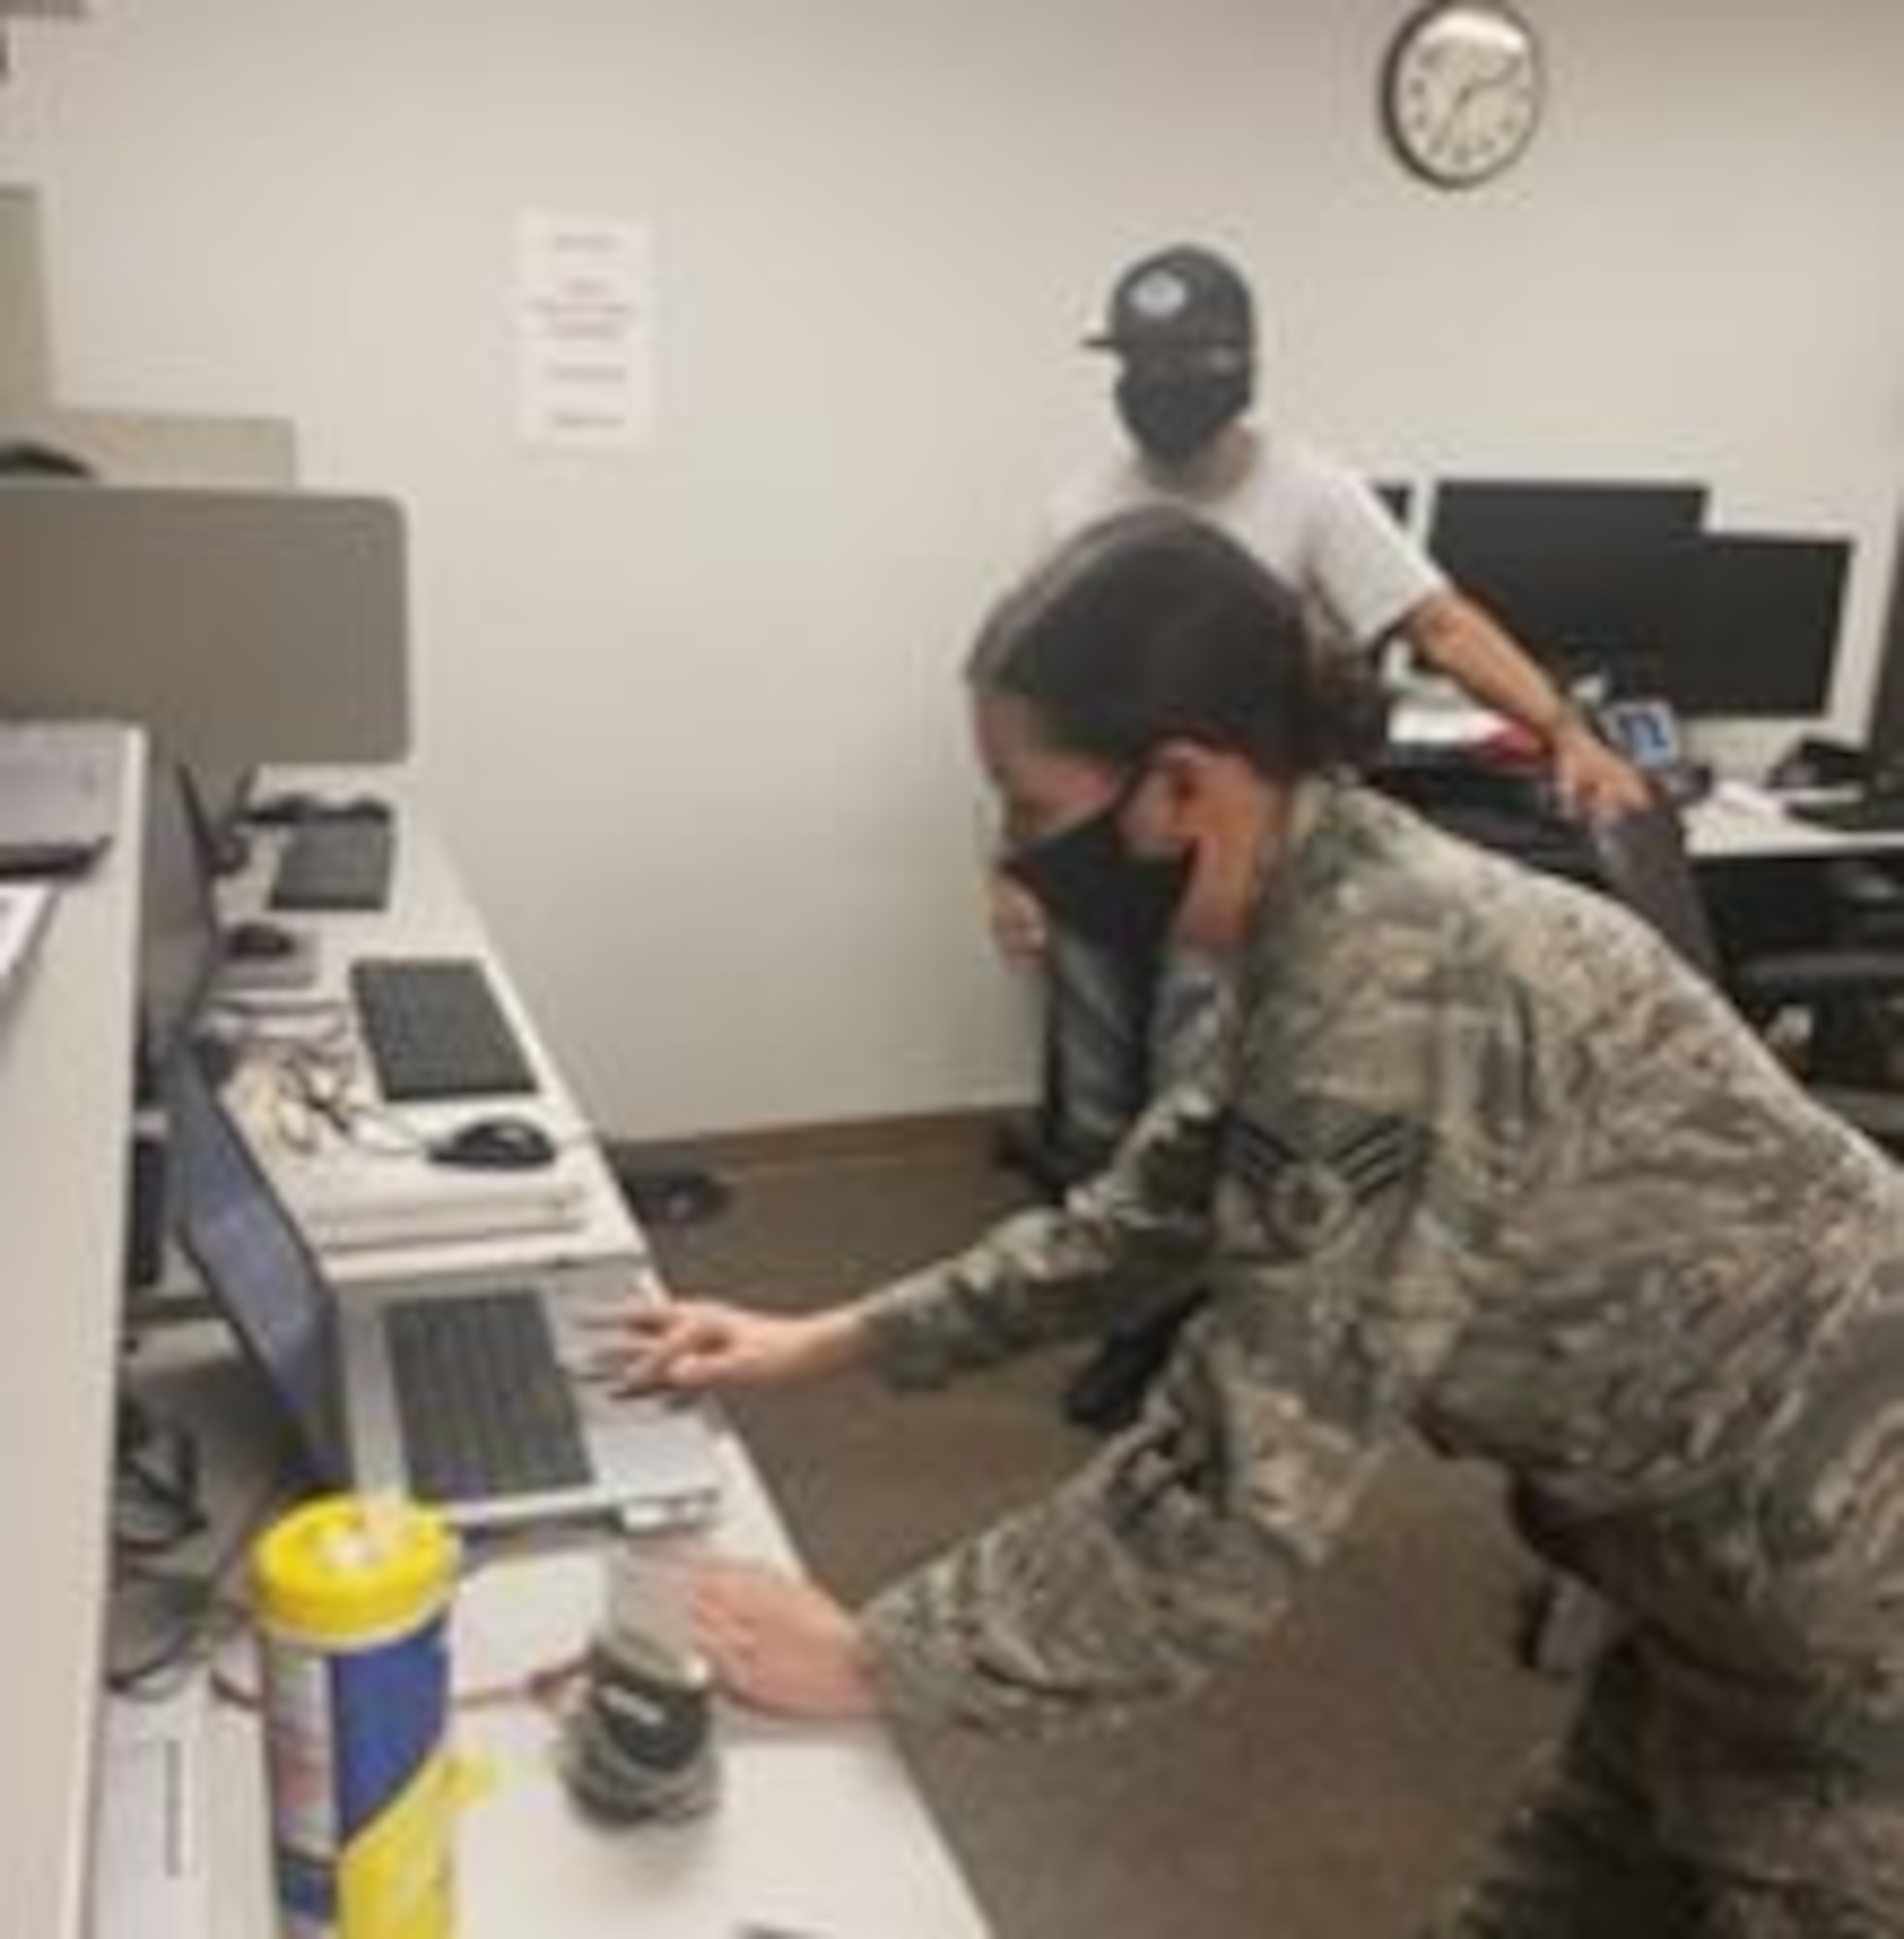 Senior Airman May Mclinden, 452nd Communications Squadron, Communications Focal Point section, does touch maintenance to patch a computer issue that prevents Tech. Sgt. Jose Mora, 452nd Maintenance Squadron, from telecommuting during the COVID-19 pandemic.